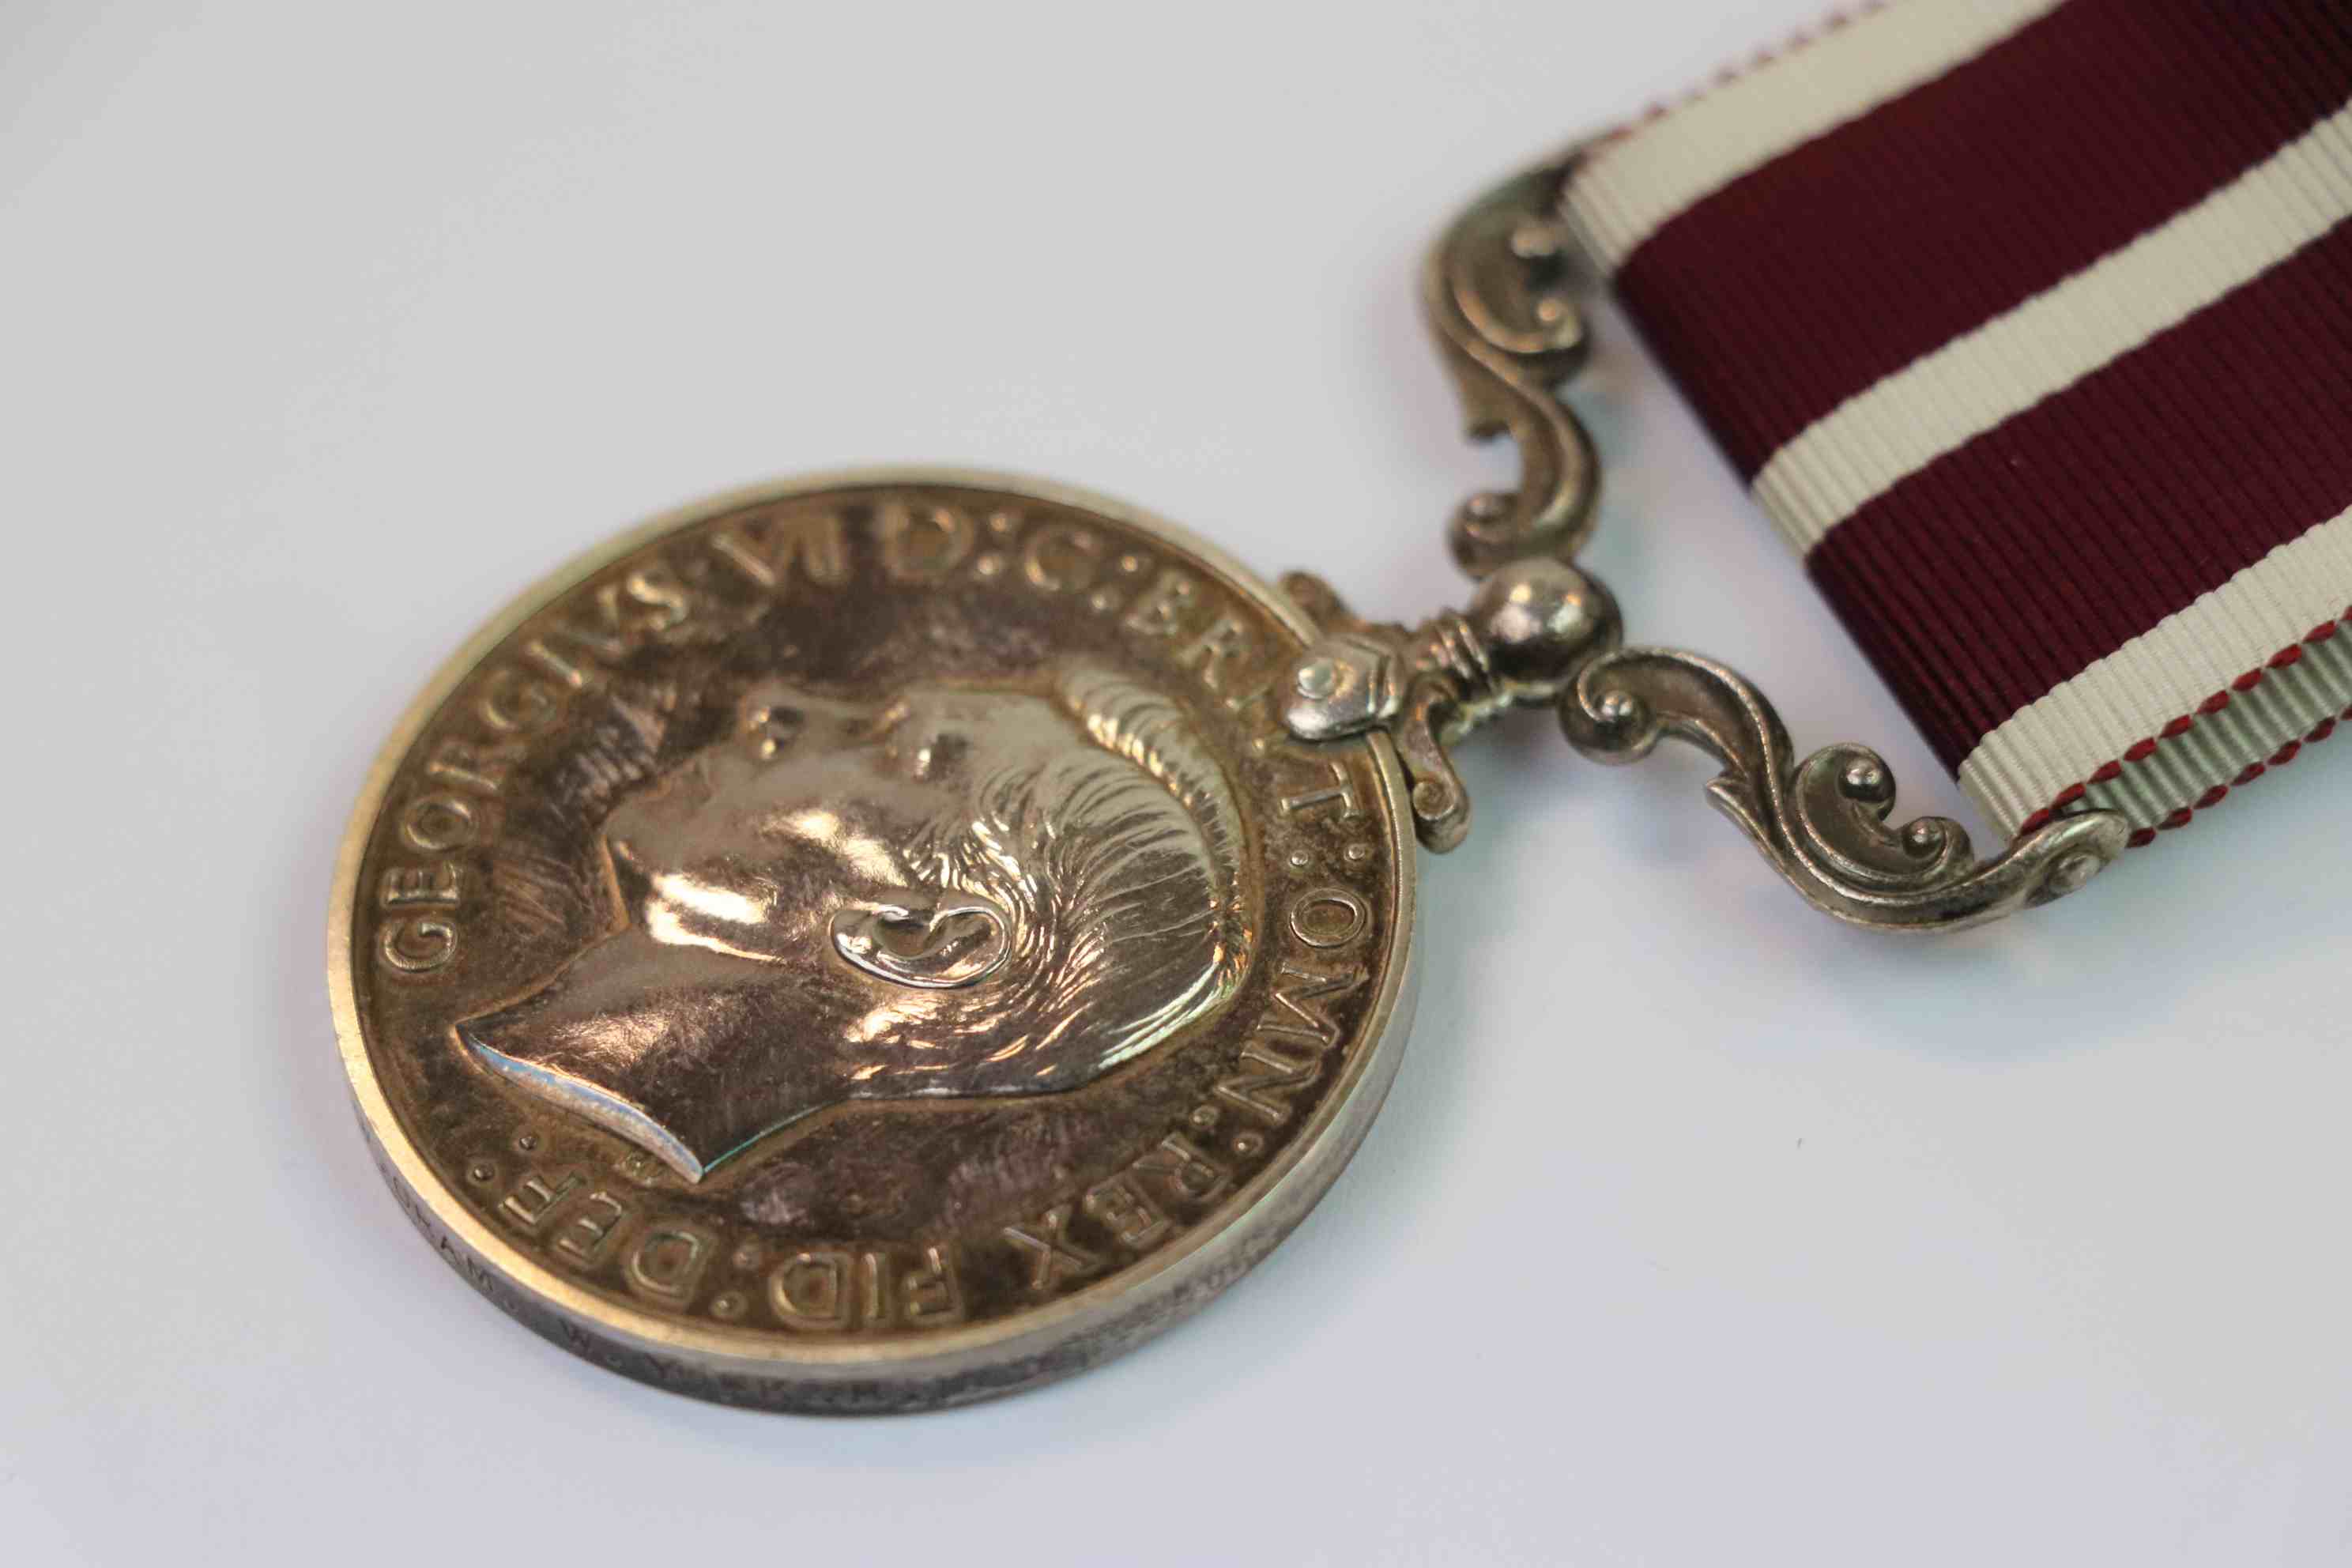 A Full Size King George VI British Army Meritorious Service Medal Issued To 4523853 SJT. J.W. ORAM - Image 10 of 11